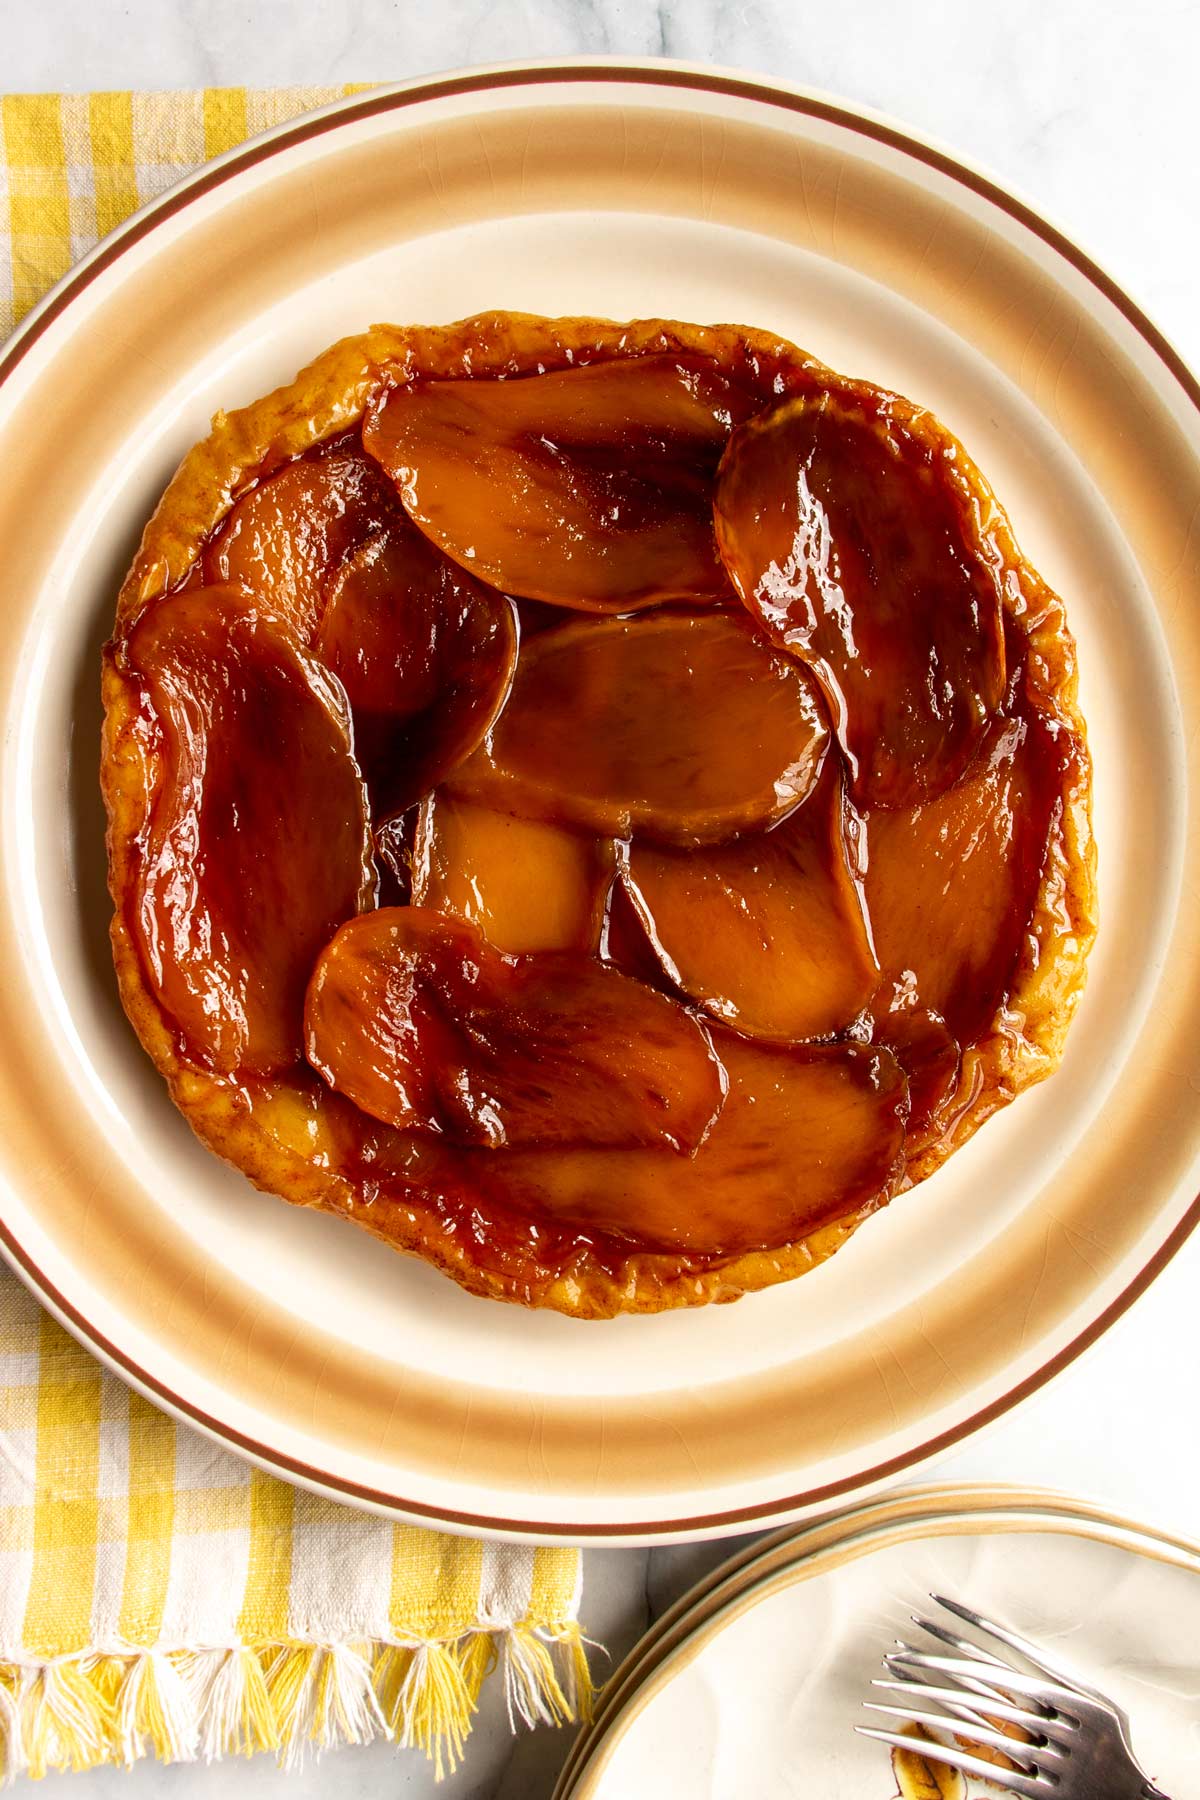 A caramelized layer of sliced mangos on a round tart served on a platter.